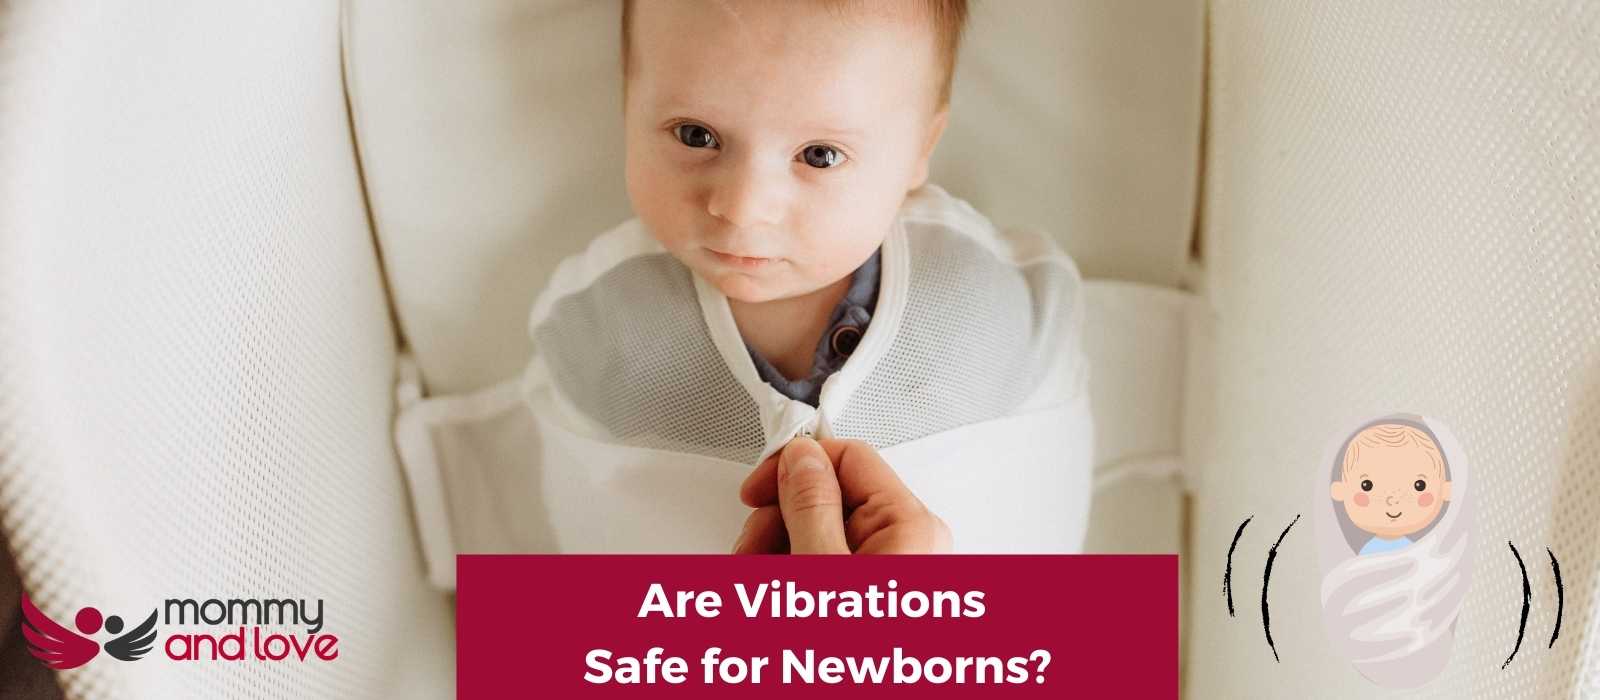 Are Vibrations Safe for Newborns